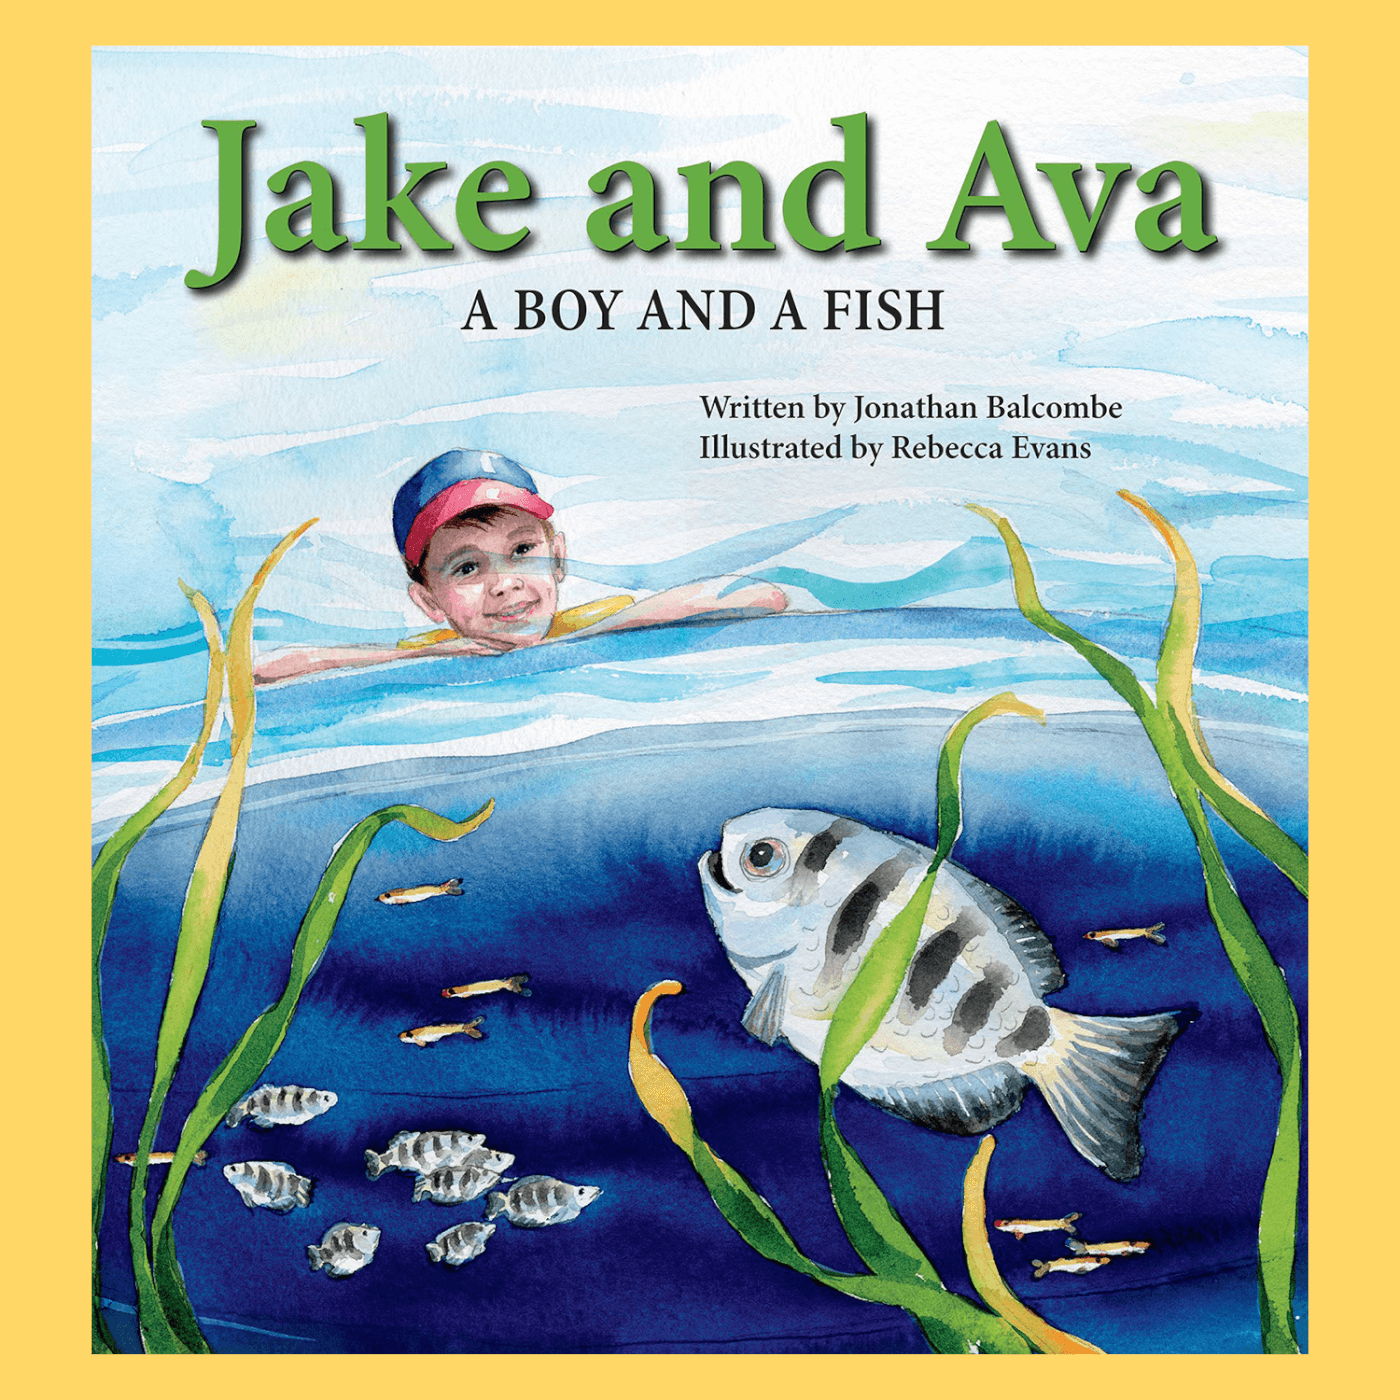 https://www.peta.org/wp-content/uploads/2018/05/Jake-and-Ava-A-Boy-and-a-Fish.png